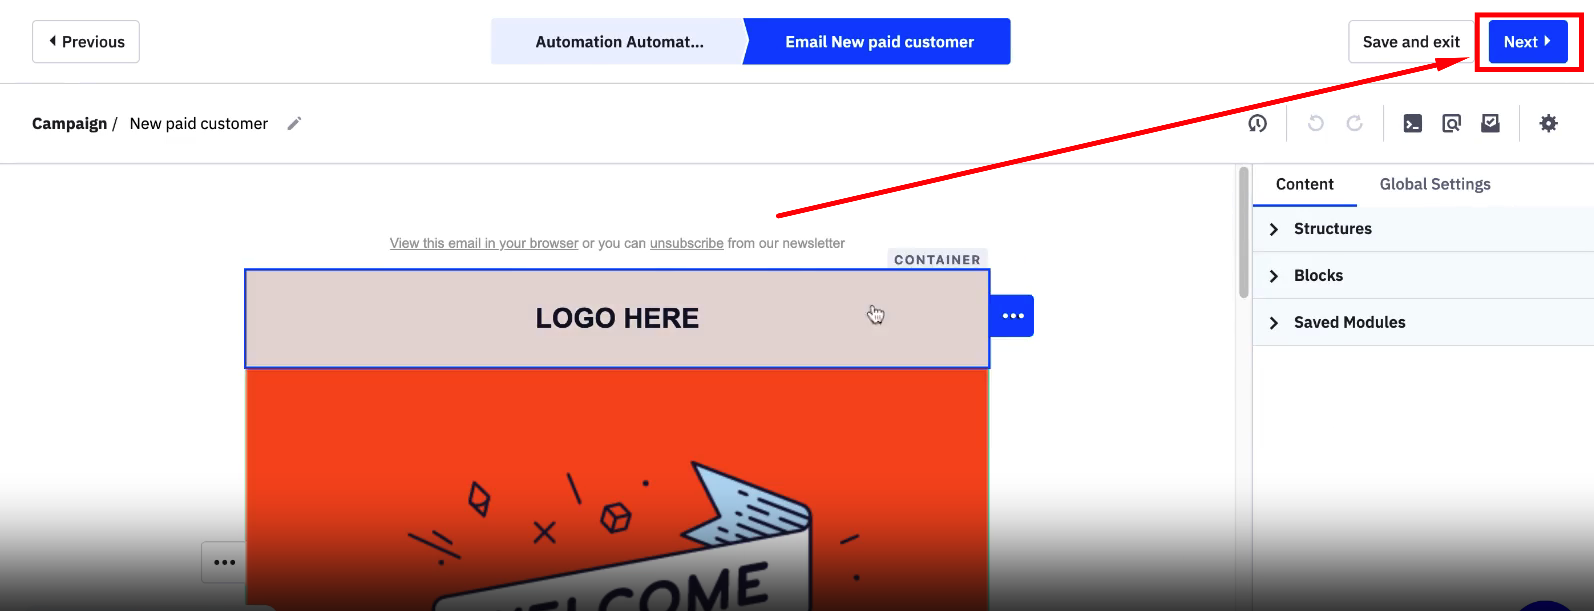 If the email is built and ready to be sent, click the next button in the right corner.